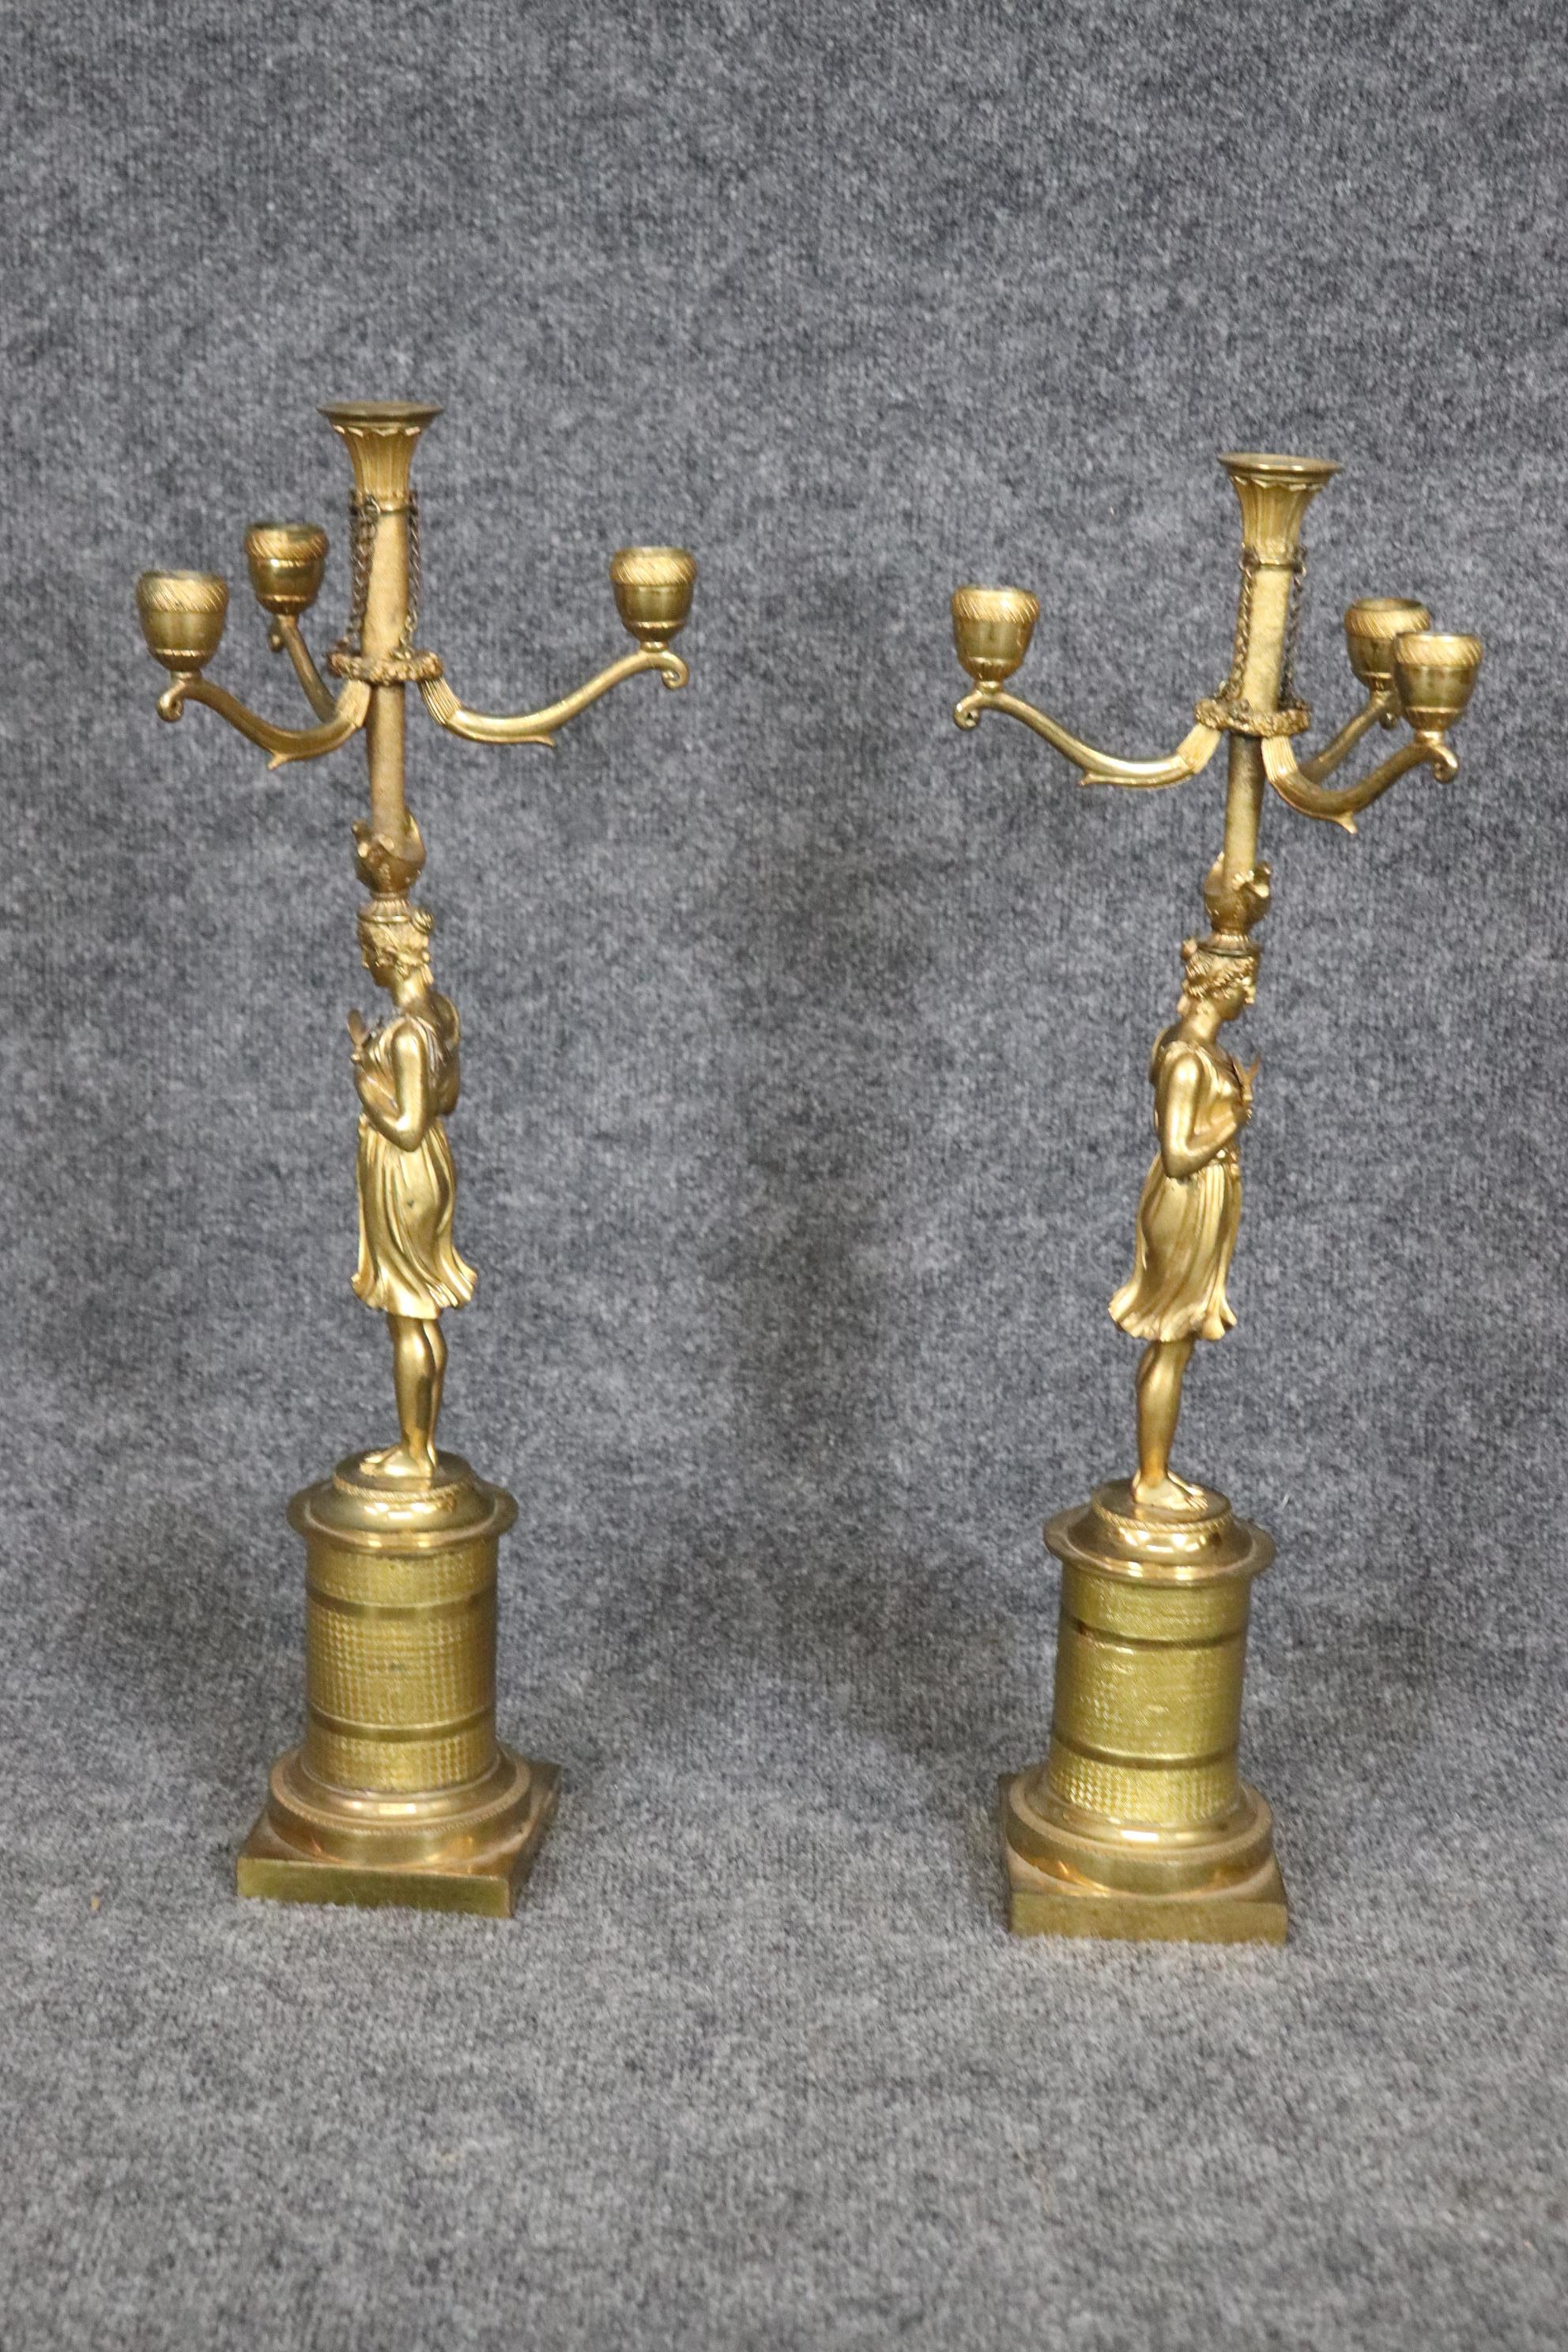 Neoclassical Revival Pair Stunning Large Solid Bronze 19th Century Draped Figural Maidens Candleabra For Sale